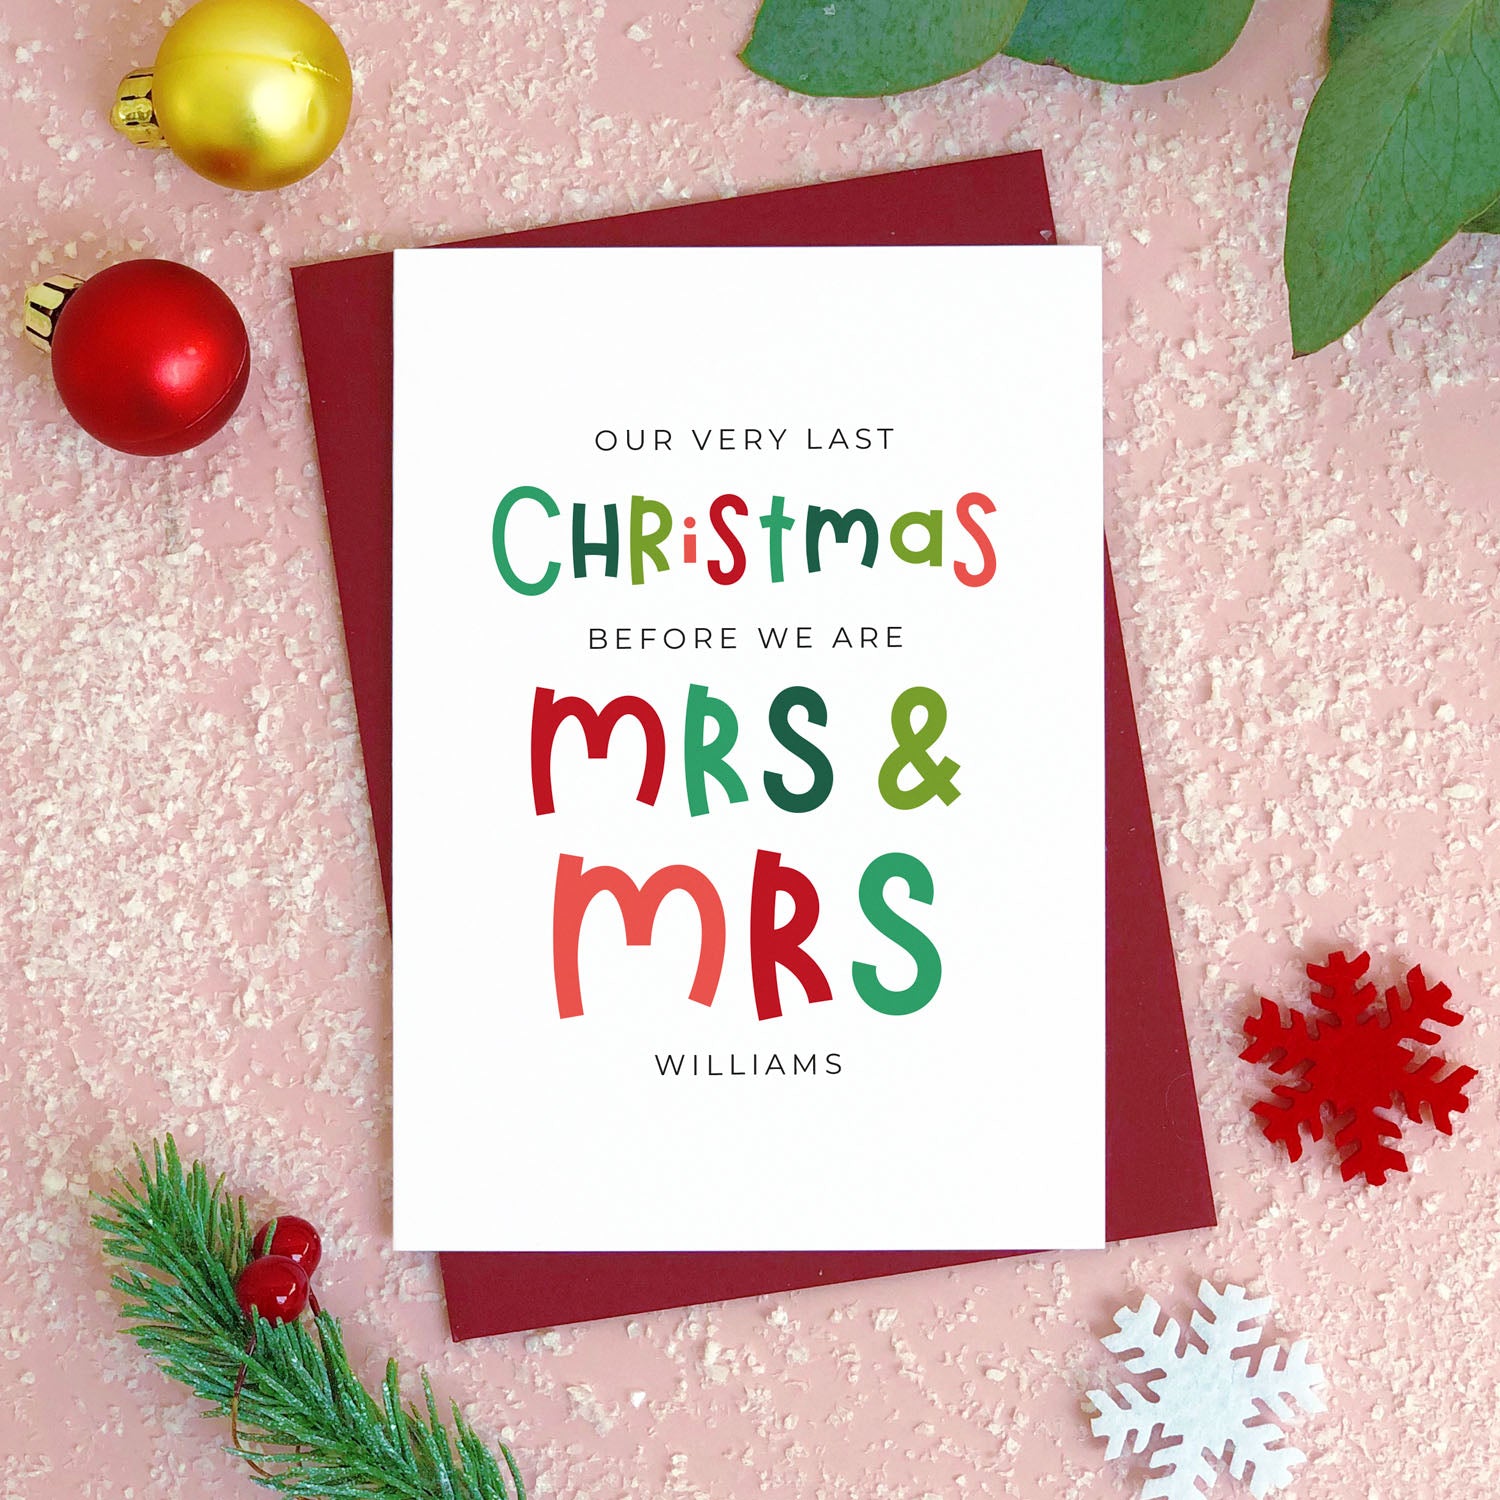 A personalised last Christmas card photographed flat lying on a red wine coloured envelope on a pink surface surrounded by fake snow, baubles and foliage.